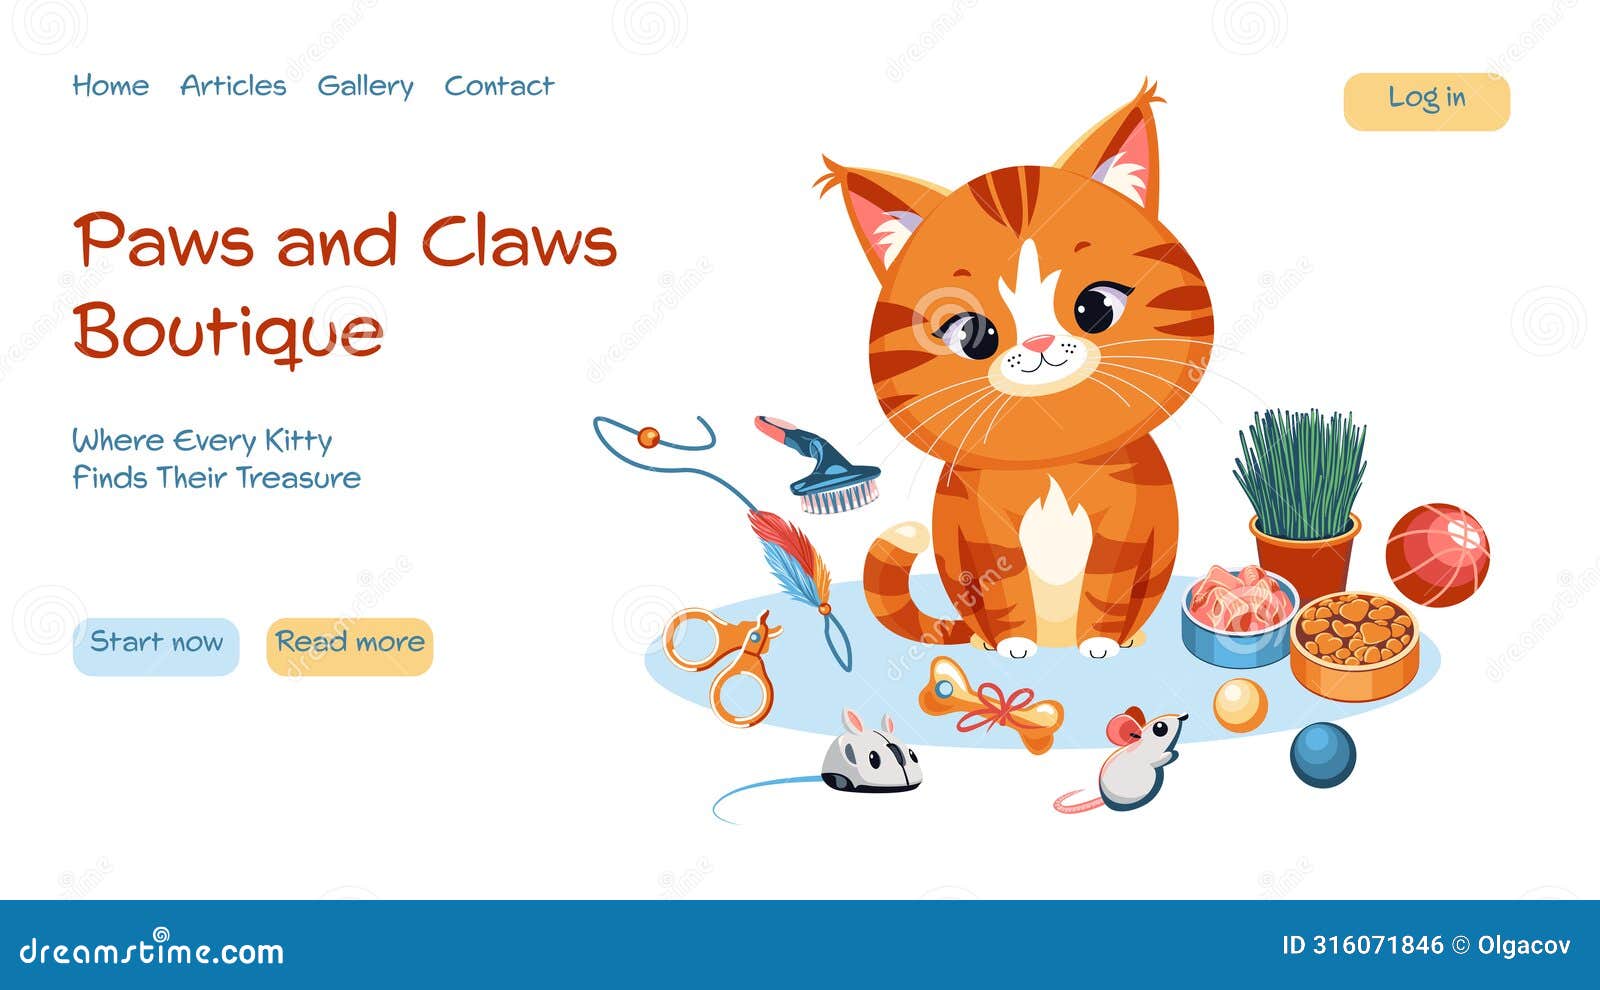 paws and claws boutique webpage